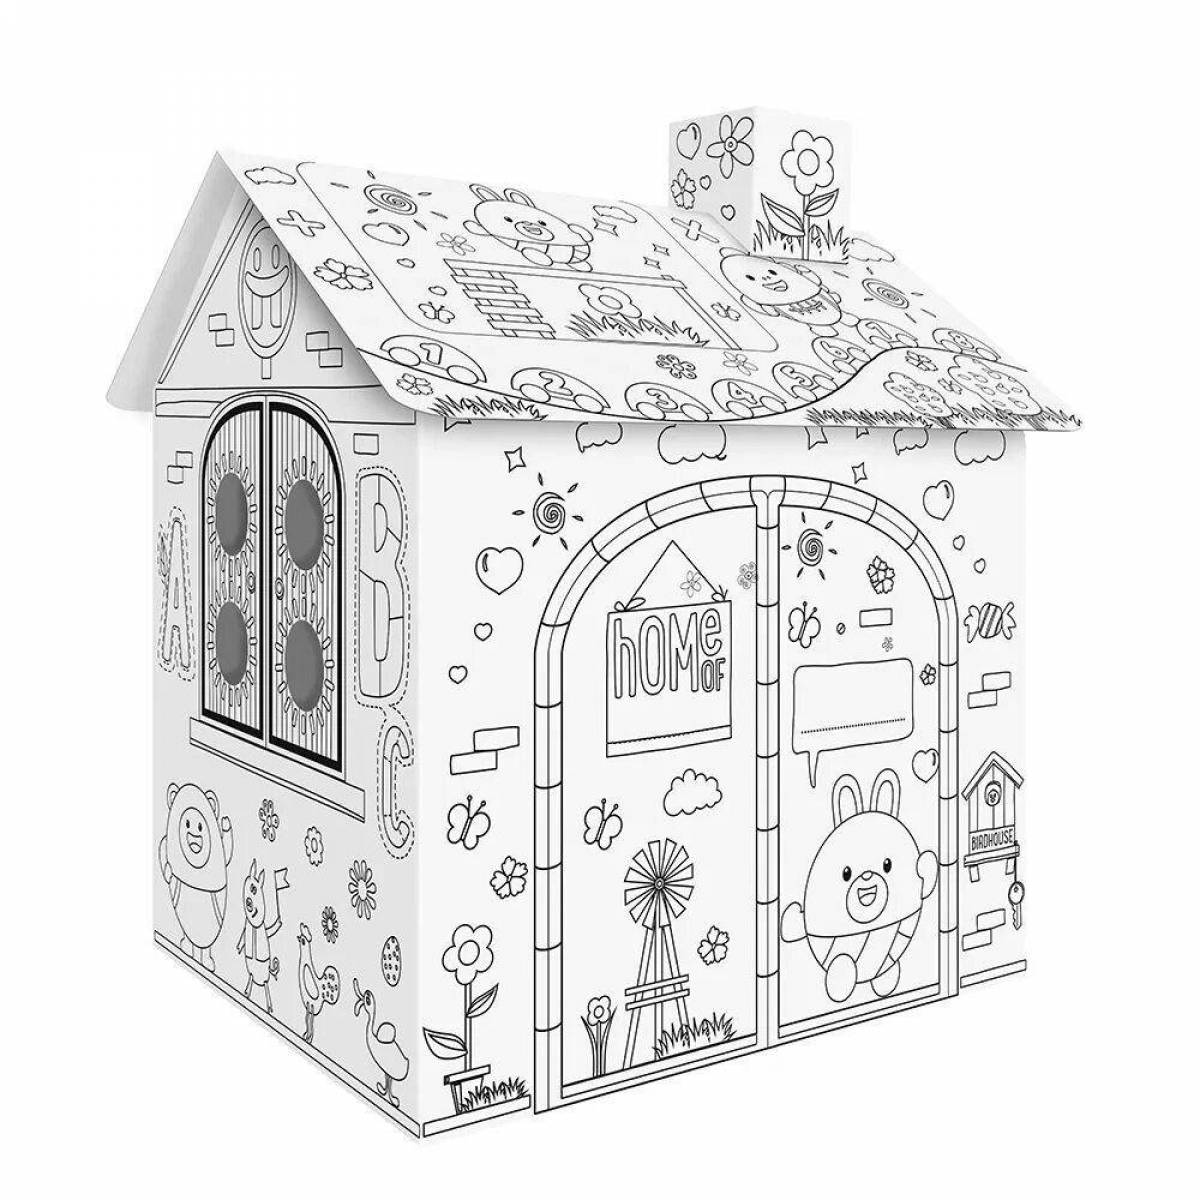 Living big house coloring book for kids